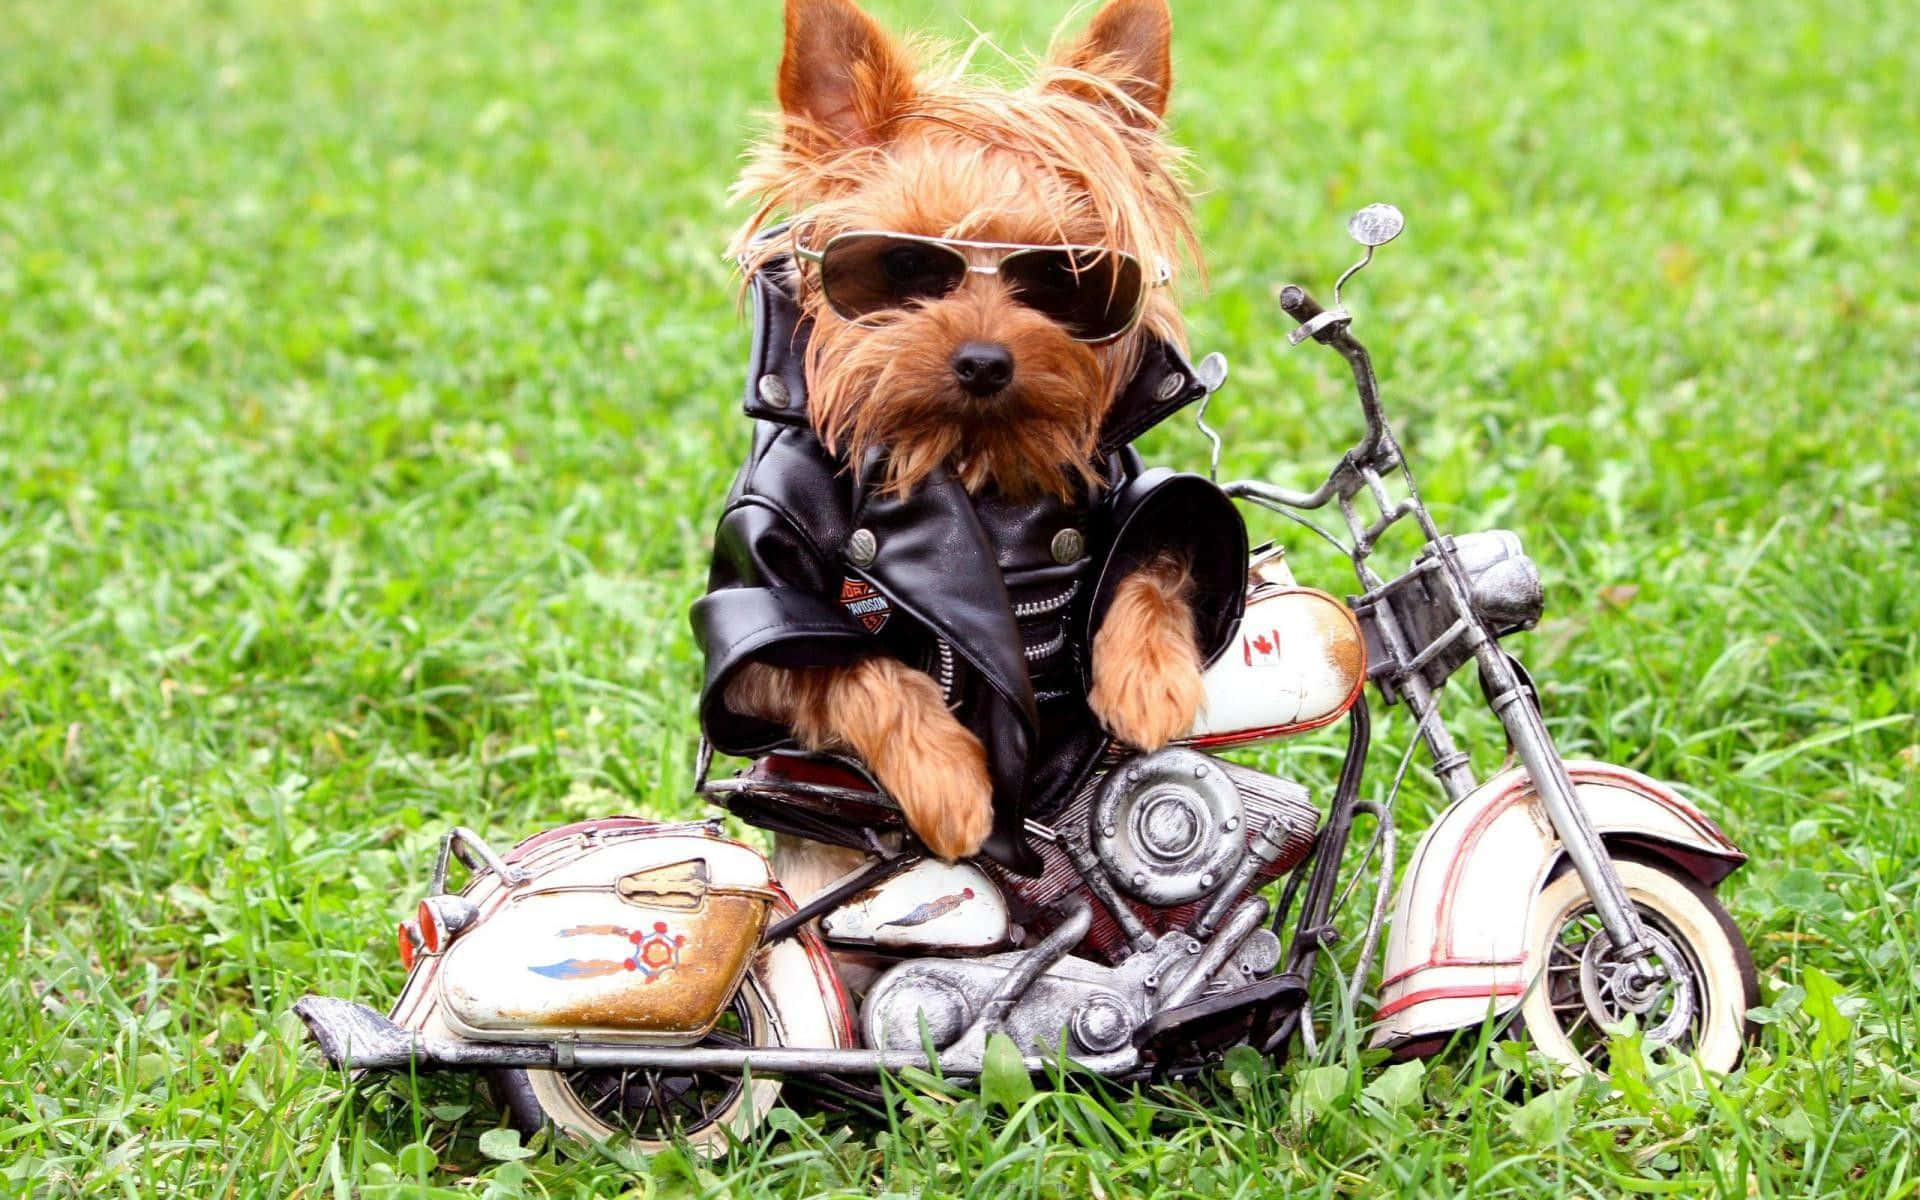 Funny Dog With Toy Motorcycle